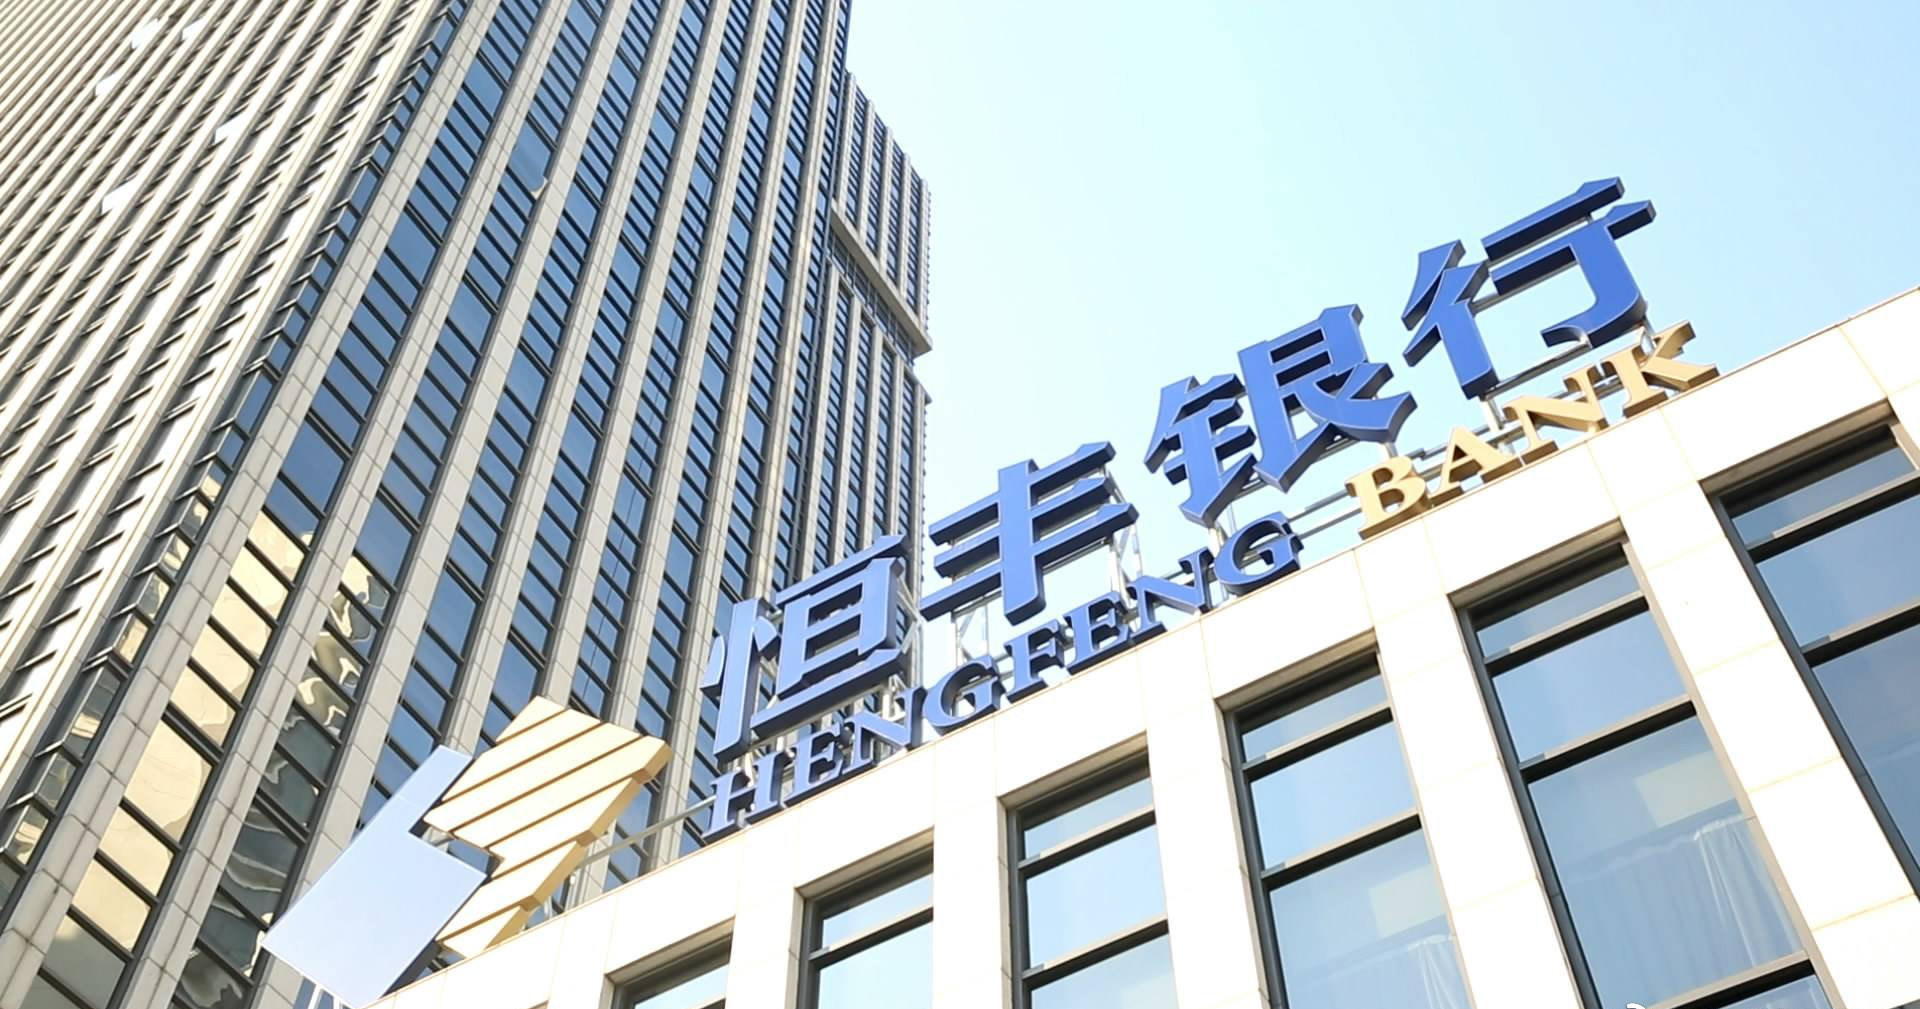 A Heng Feng Bank logo is seen in this picture. Photo: Weibo